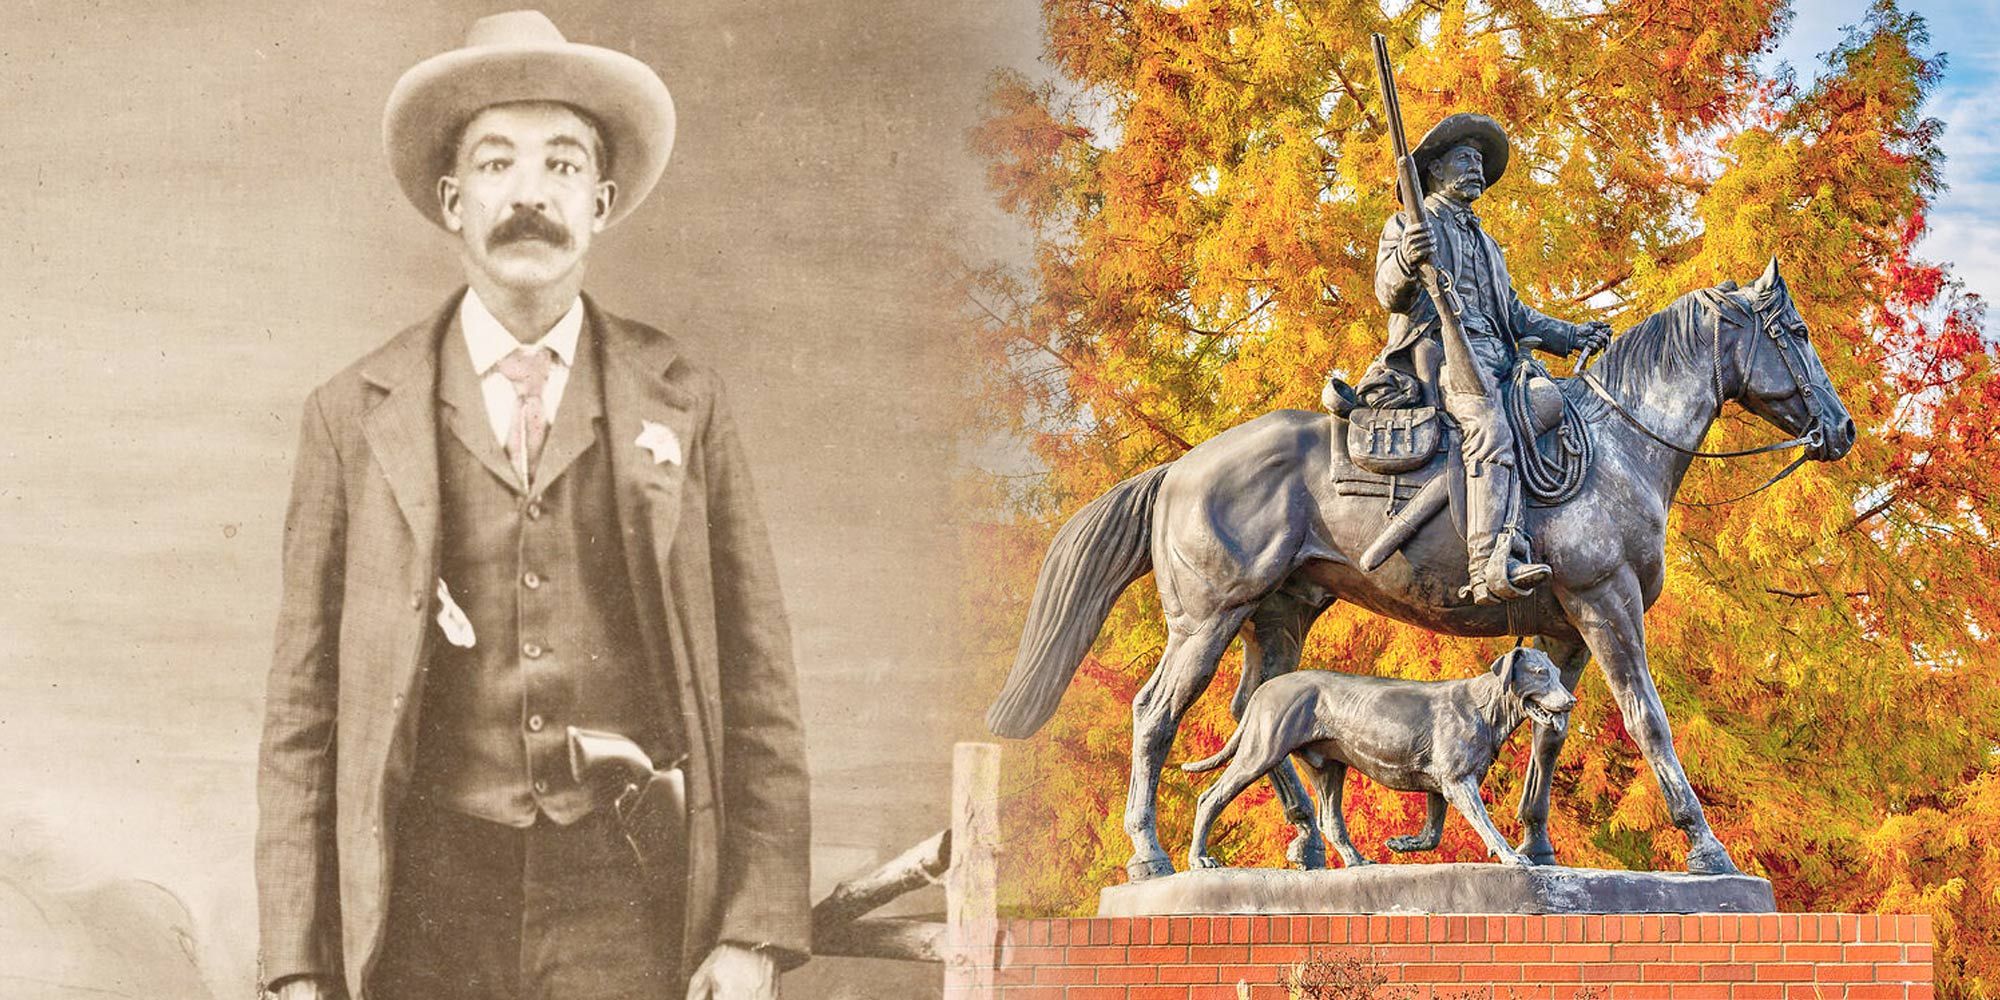 Who Is Bass Reeves? 1883 Season 2's New Main Character Explained